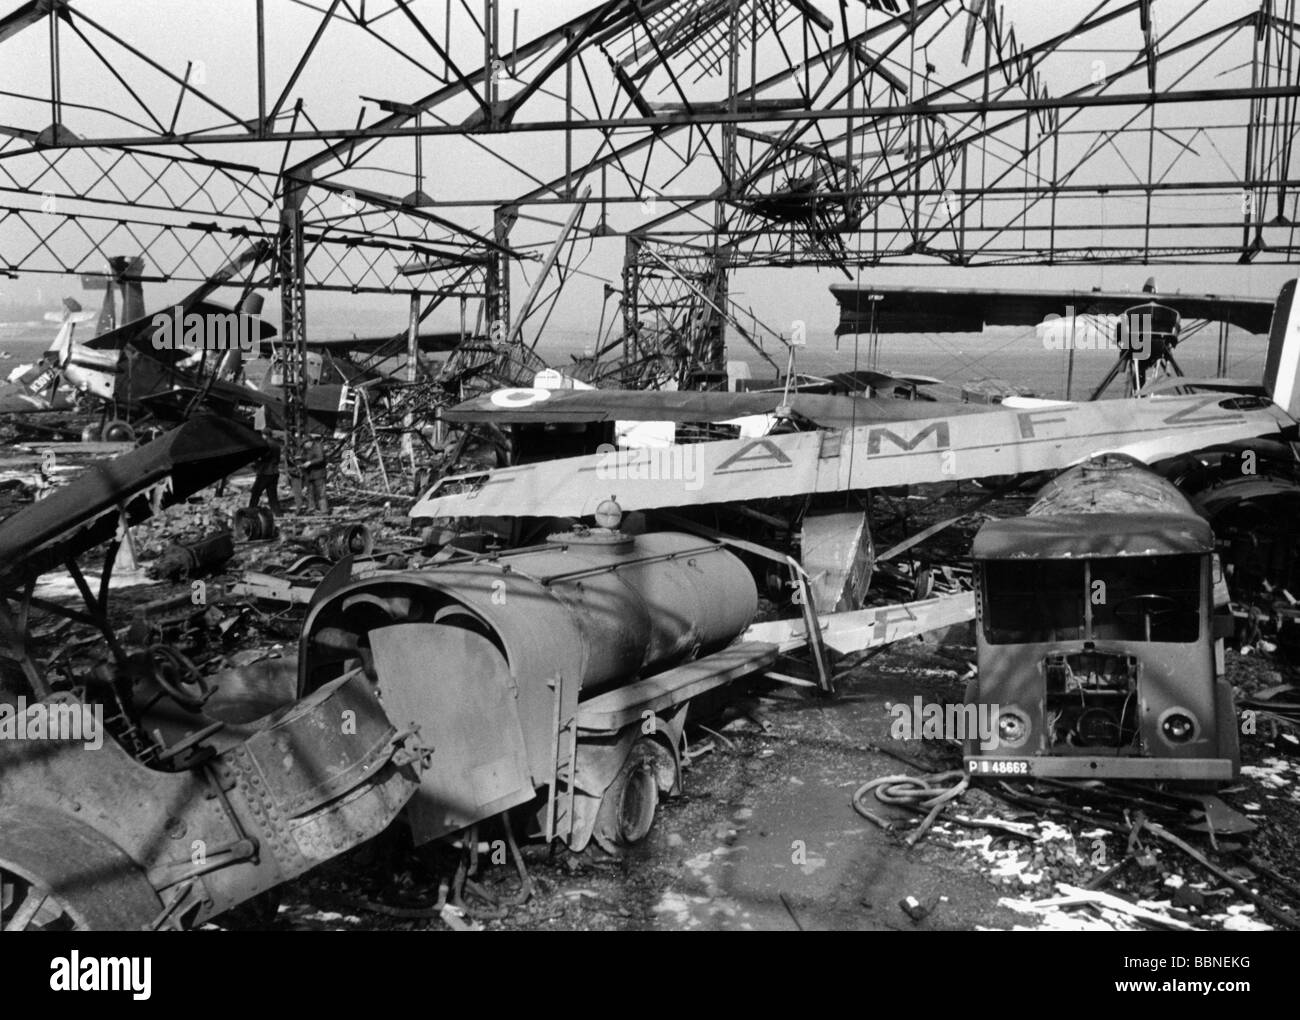 events, Second World War / WWII, aerial warfare, France 1942 / 1943, airfield St. Cyr after a bombing raid, destroyed planes and fuelling vehicles, circa 1942, 20th century, historic, historical, bomb war, wreckage, wreck, wrecks, destruction, airport, hangar, tank lorry, lorries, 1940s, Stock Photo